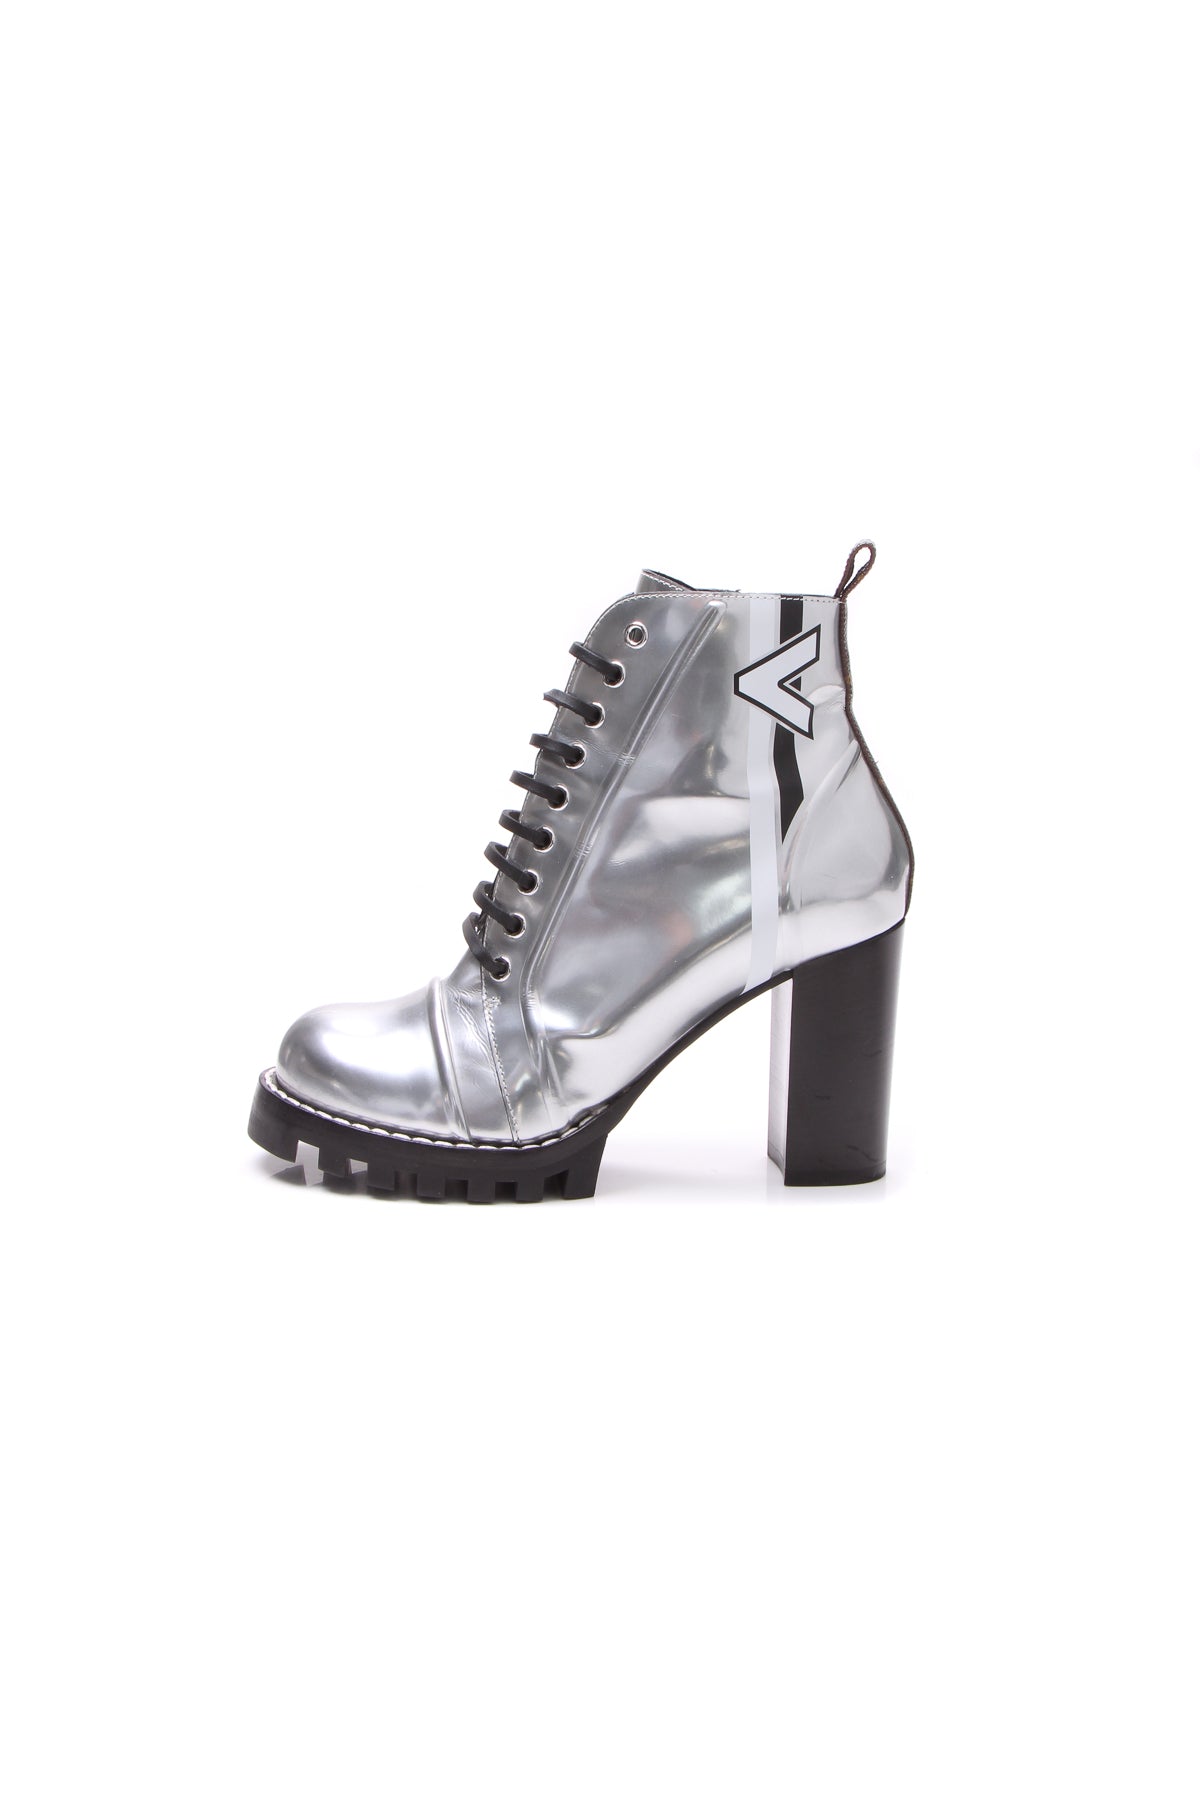 Louis Vuitton Spaceship Star Trail Ankle Boots - Silver Size 39.5 - Couture  USA